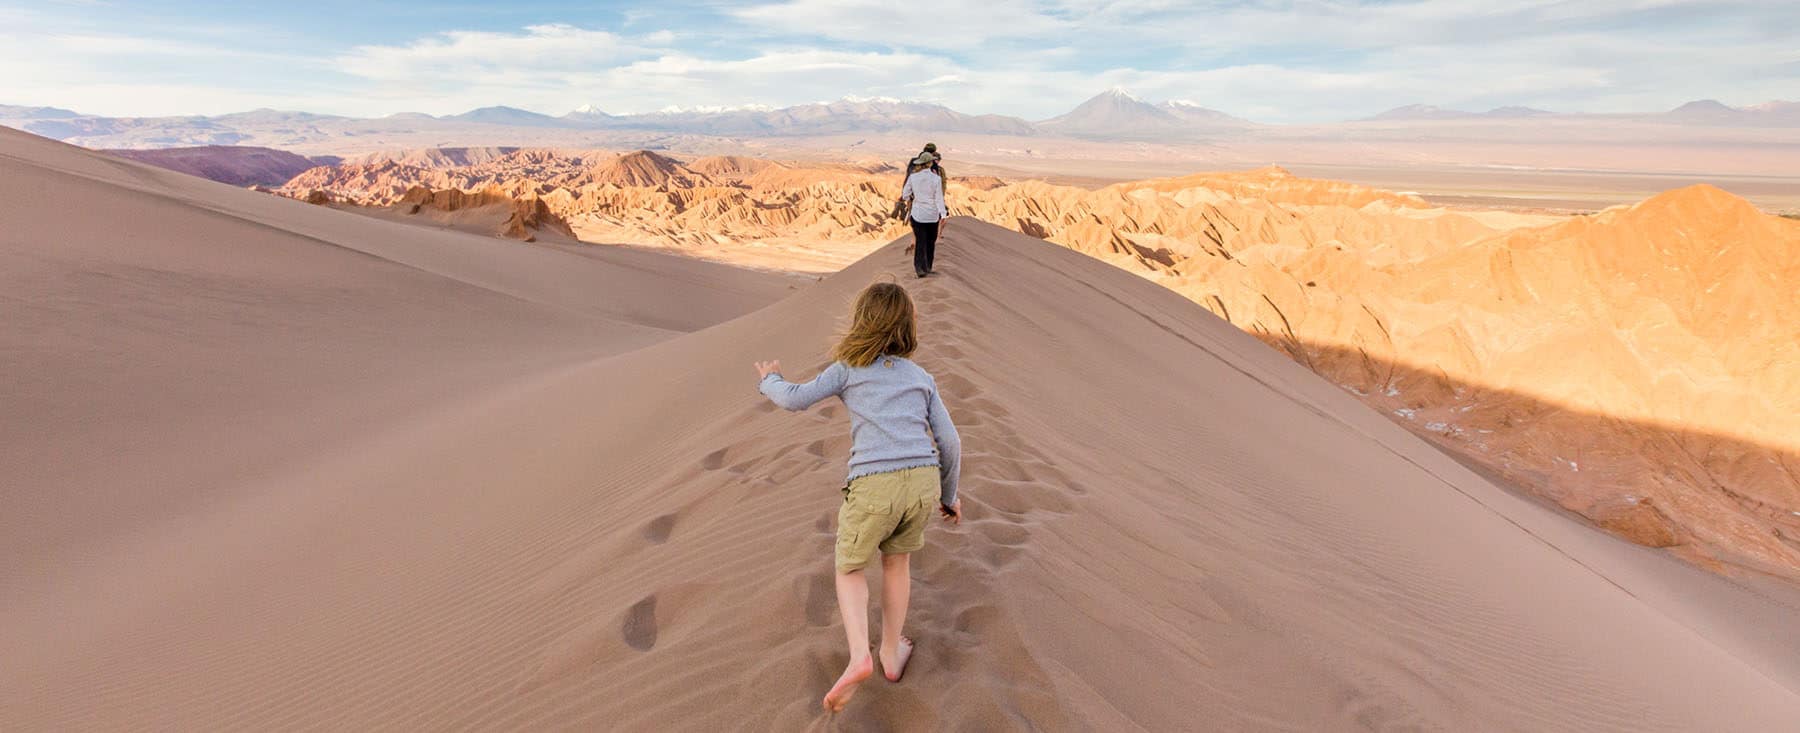 All inclusive family vacation packages for the perfect family getaway in Chile